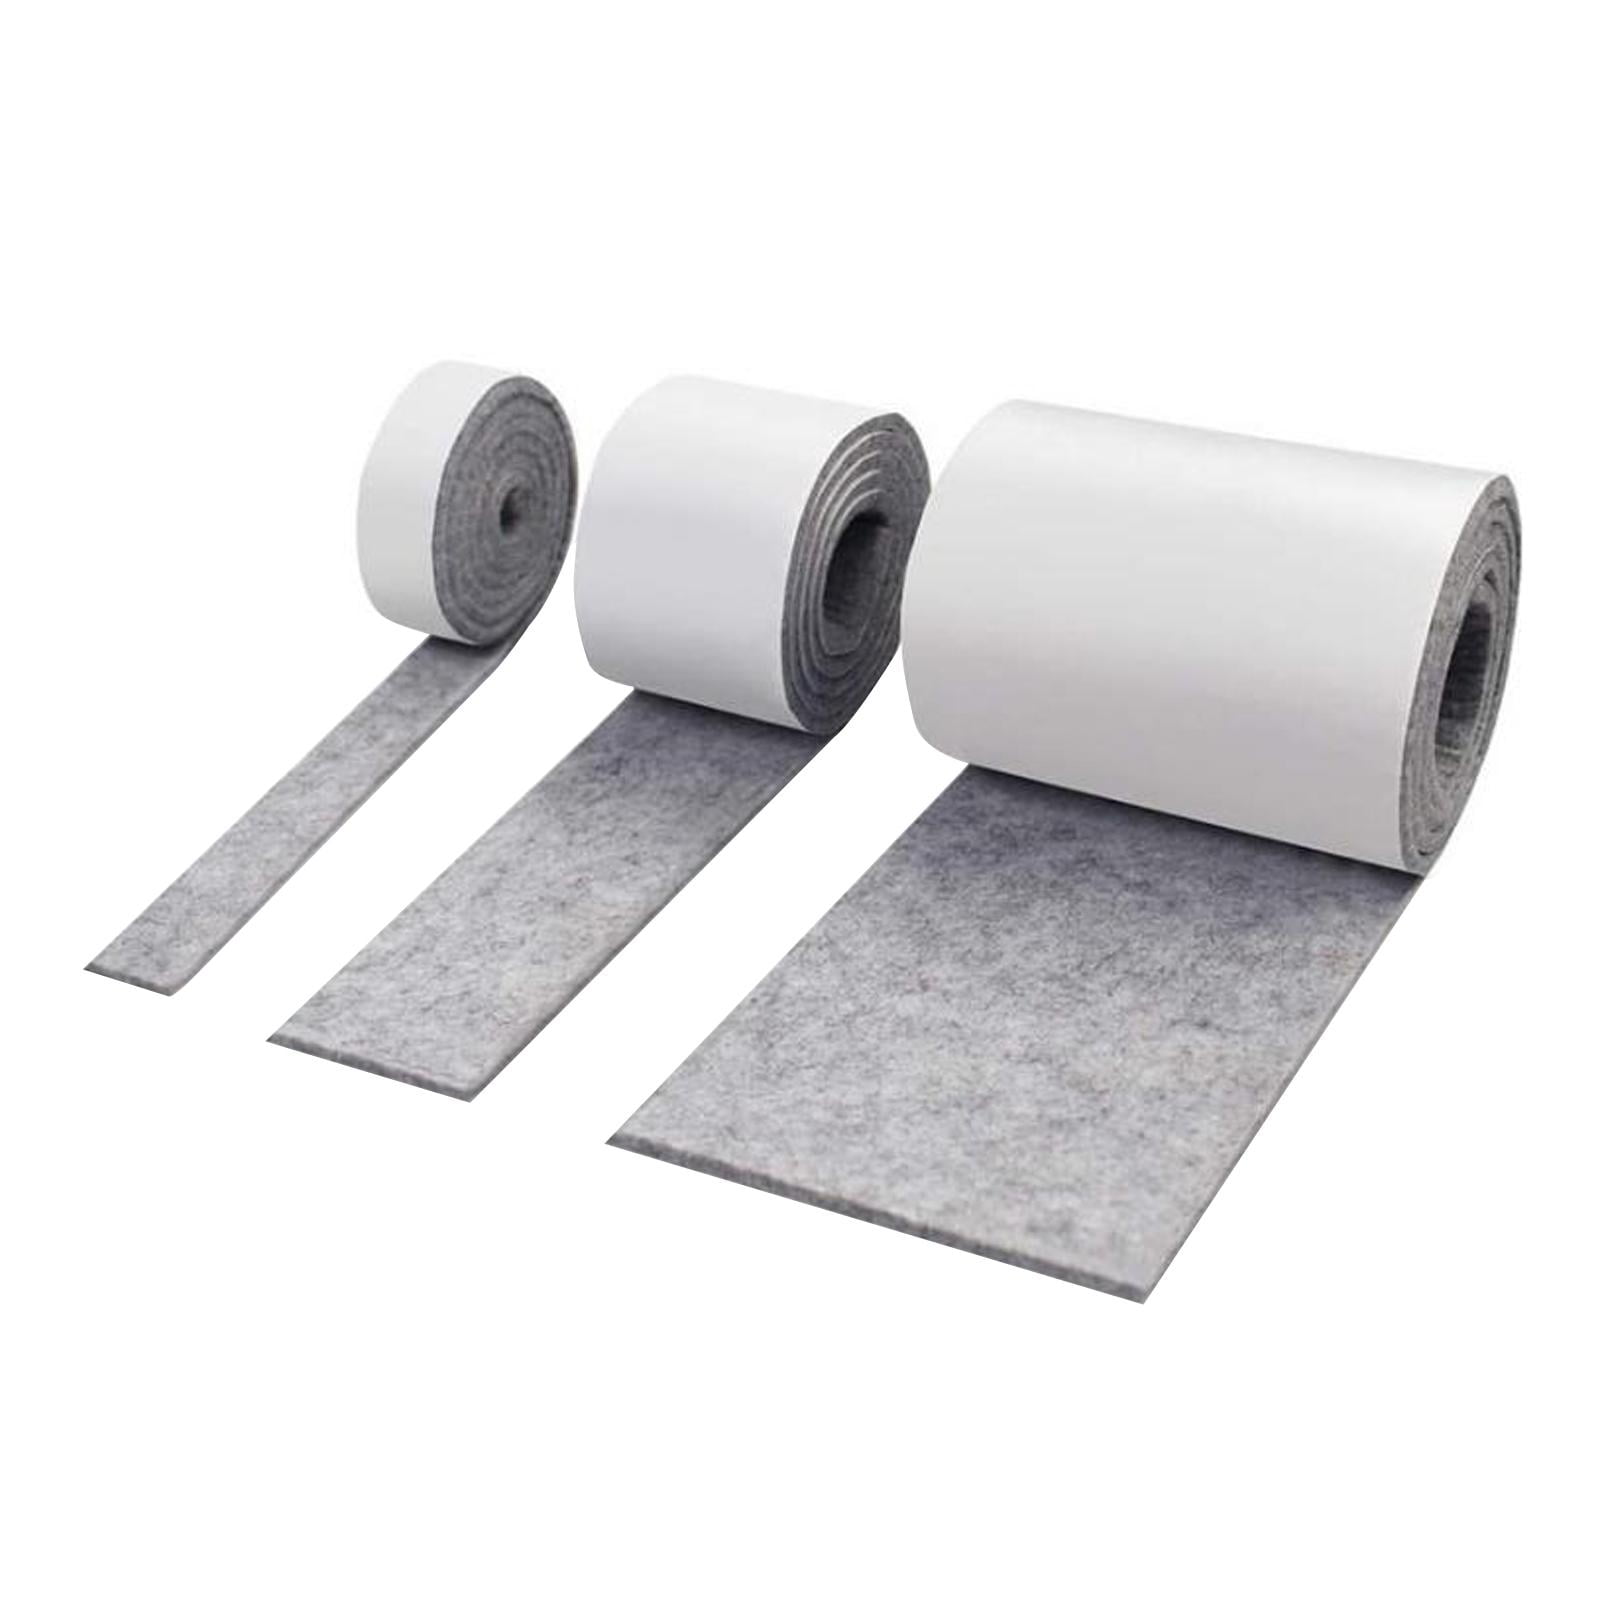 3 Packs Heavy Duty Felt Strip Roll with Adhesive Backing Self Adhesive Felt Tape Light Gray, Size: No Spool Device